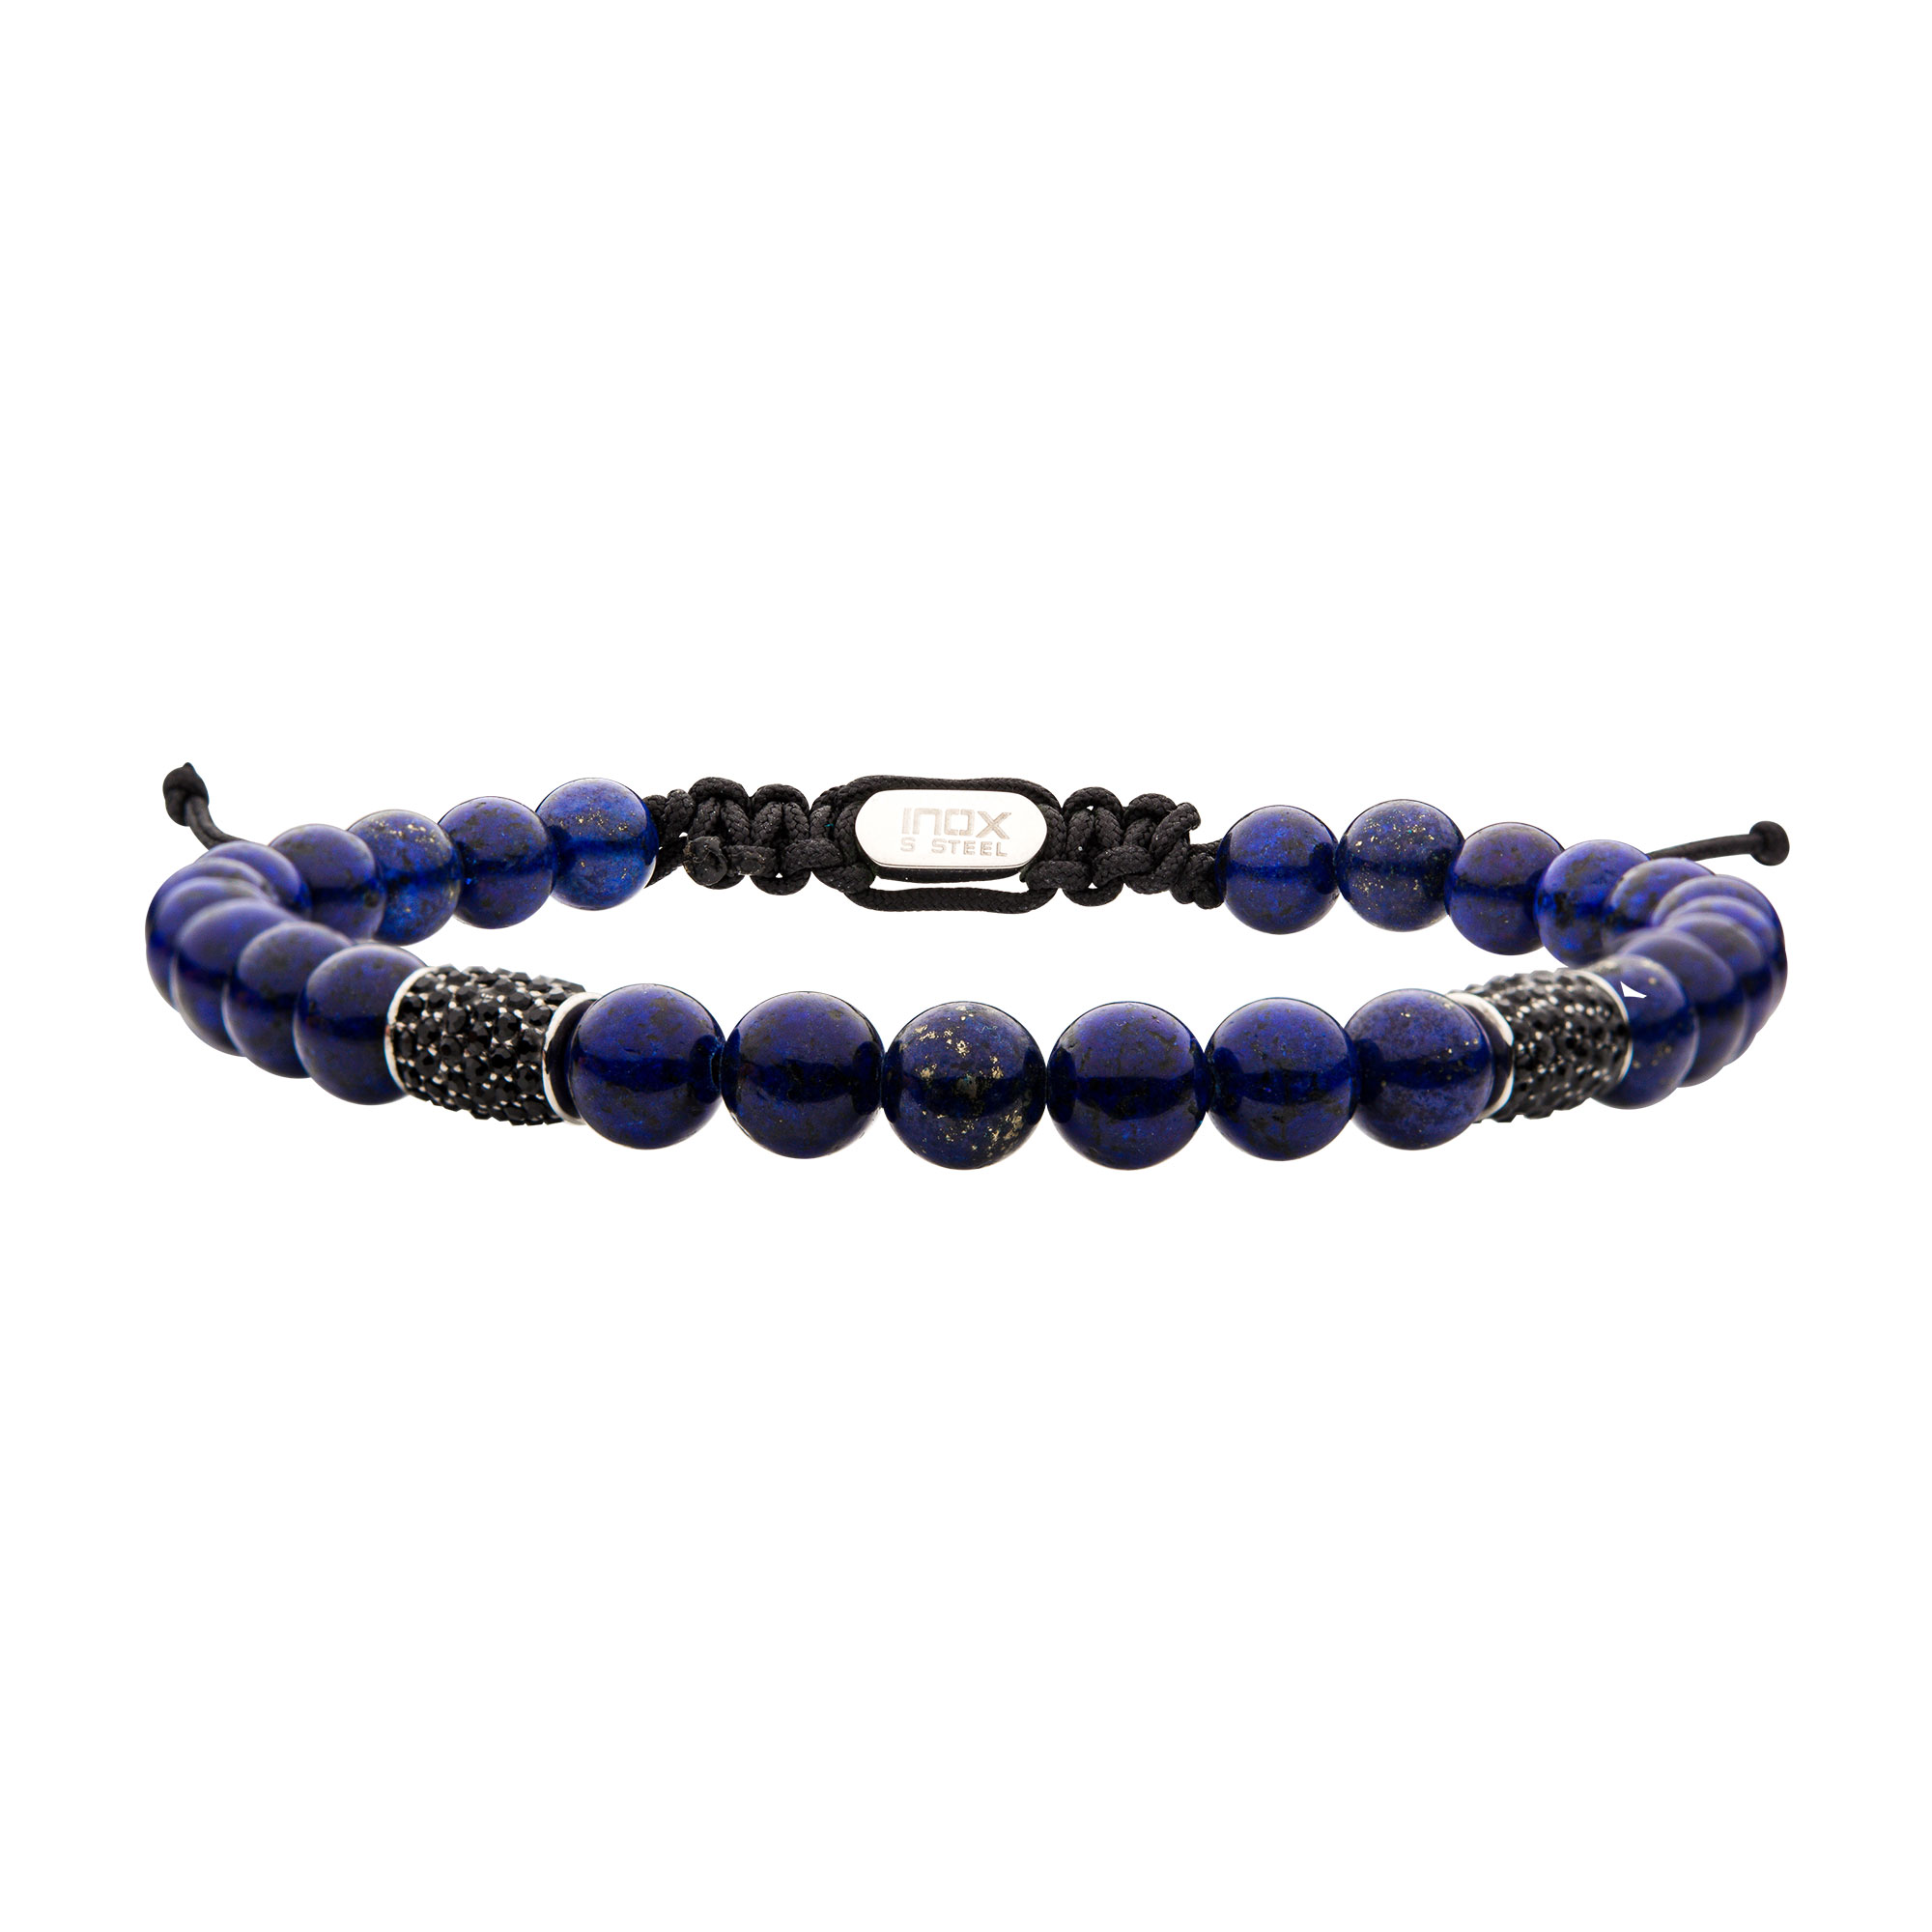 Stainless Steel Beads with Black CZ & Lapis Stone Bead Adjustable Non-Braided Bracelet Enchanted Jewelry Plainfield, CT